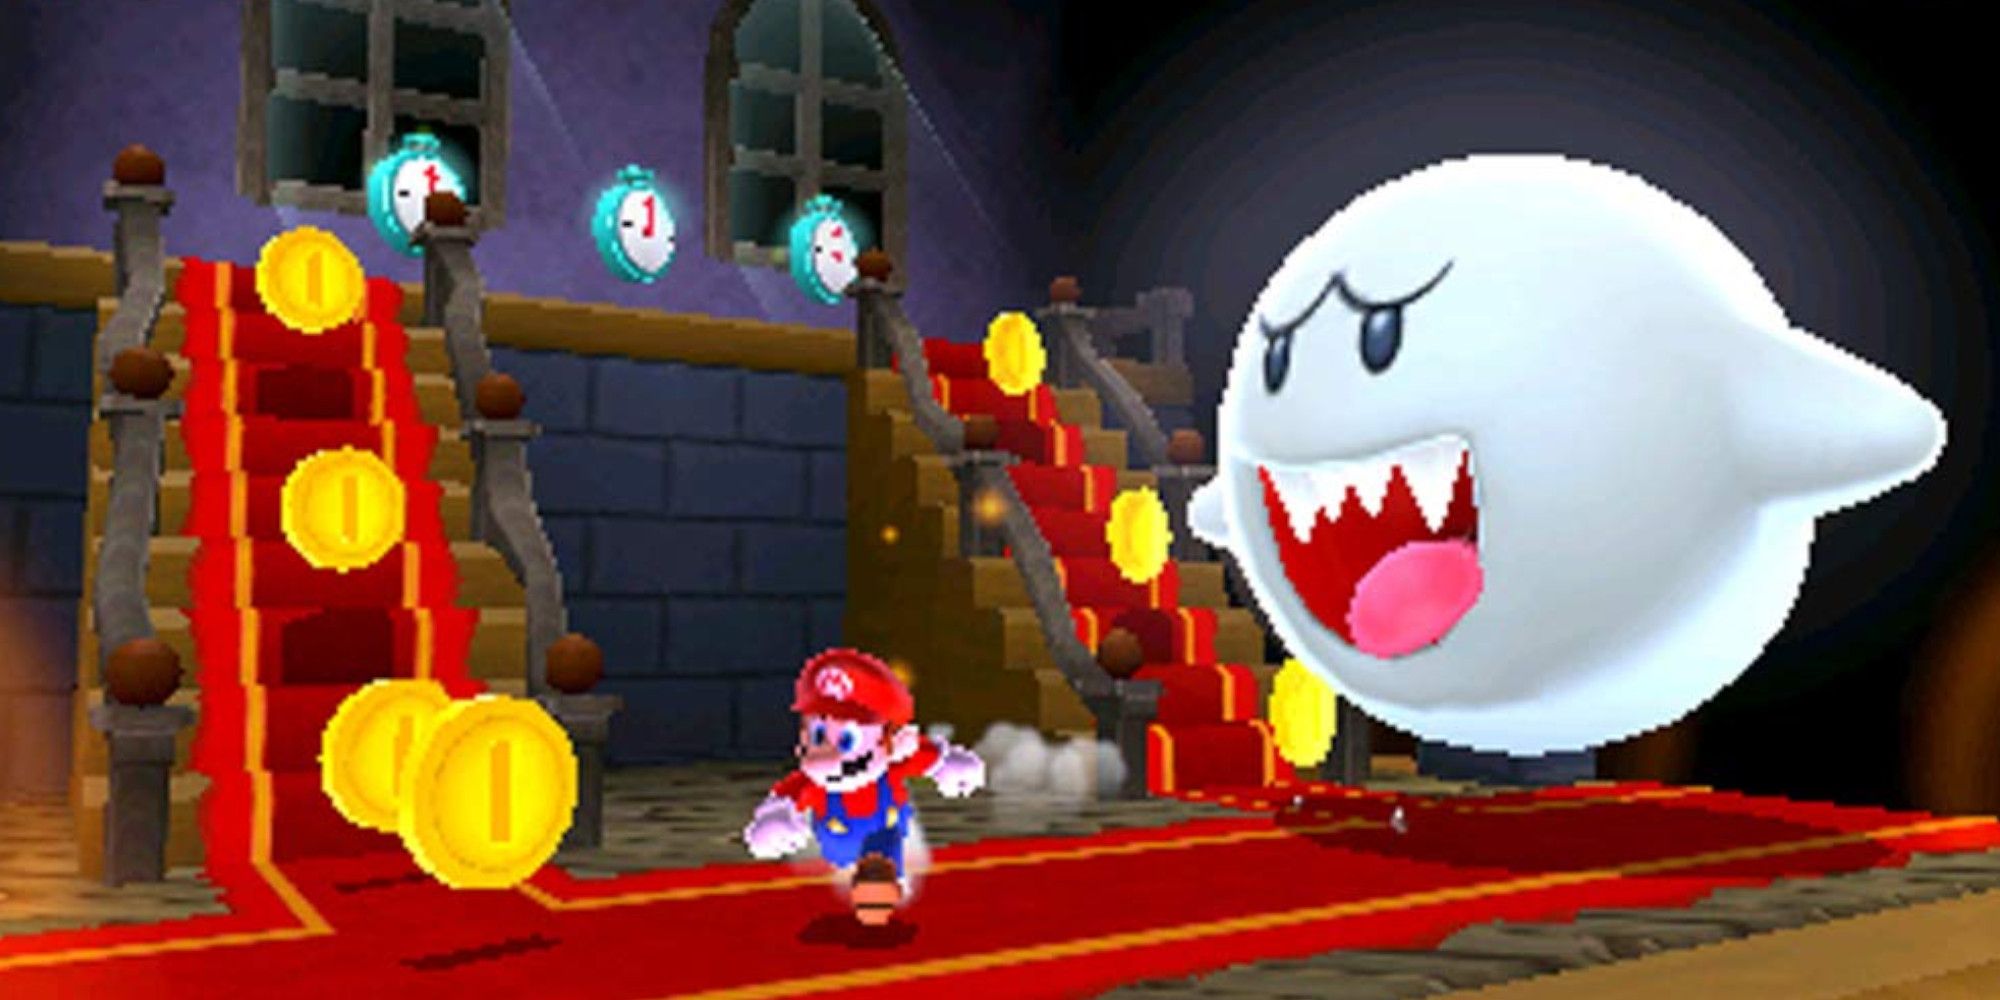 Mario in Super Mario 3D Land being chased by Big Boo